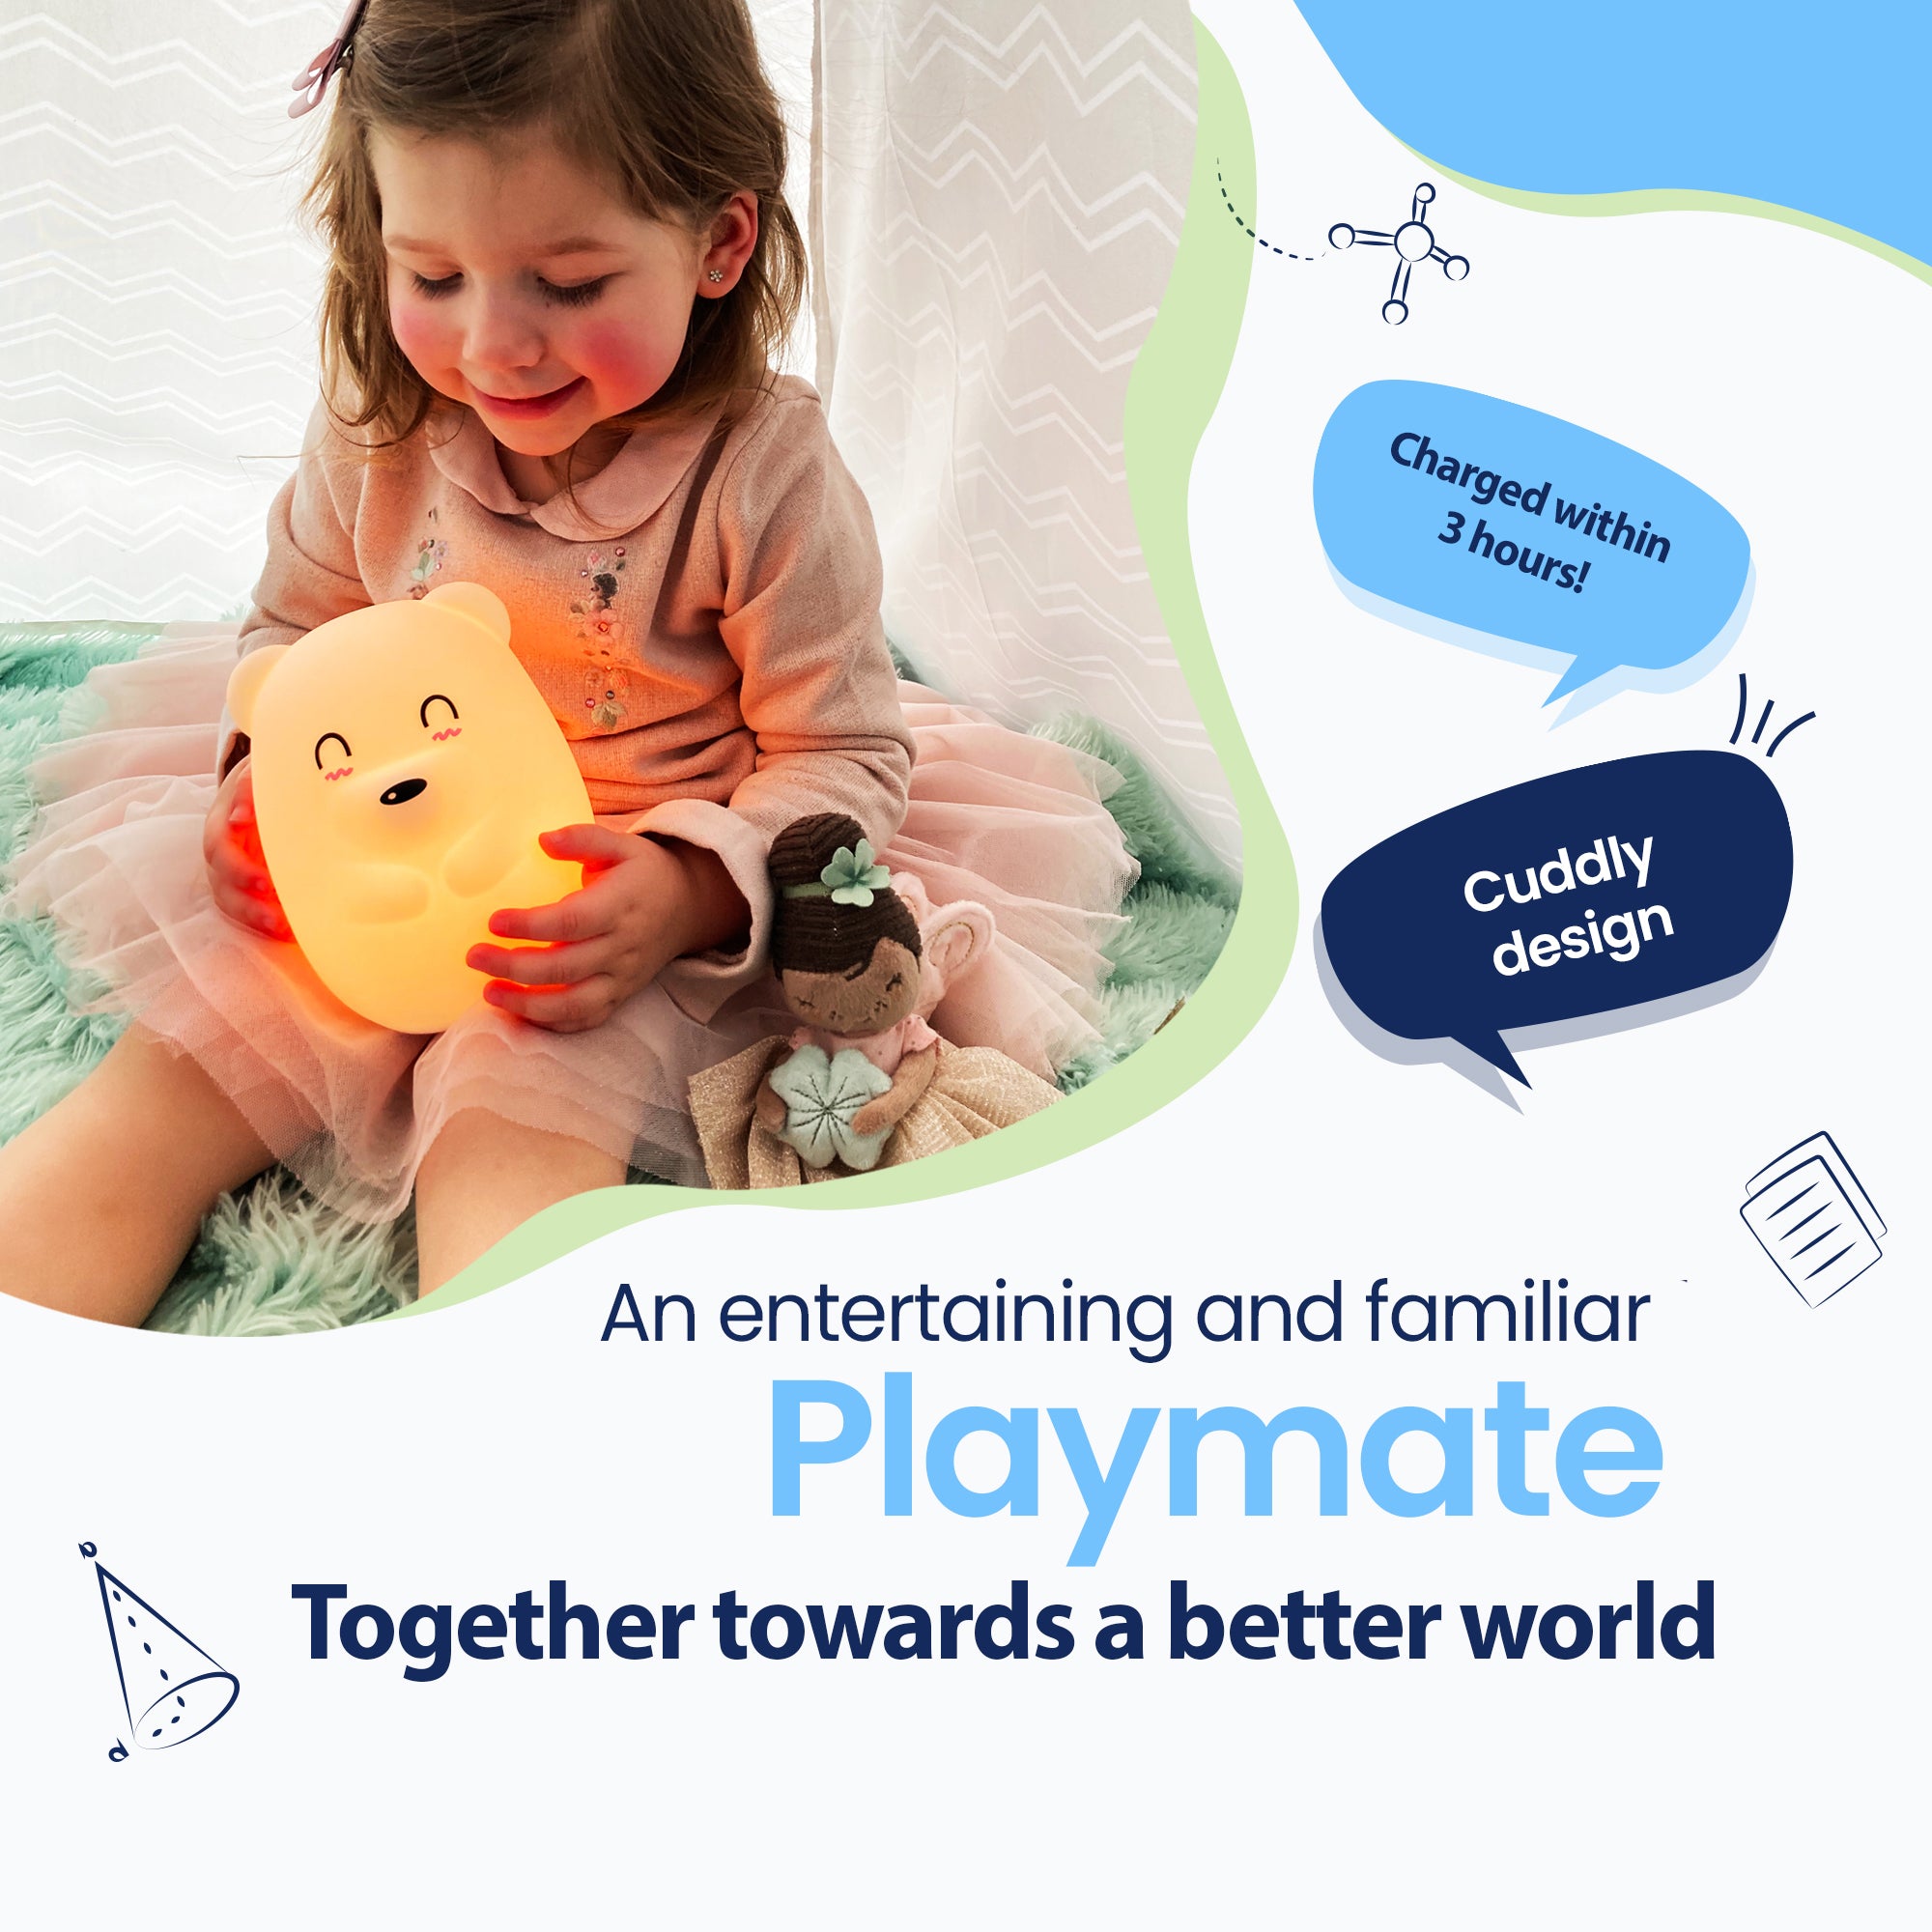 An entertaining and familiar playmate - Together towards a better world - Charged within 3 hours! - Huggable design